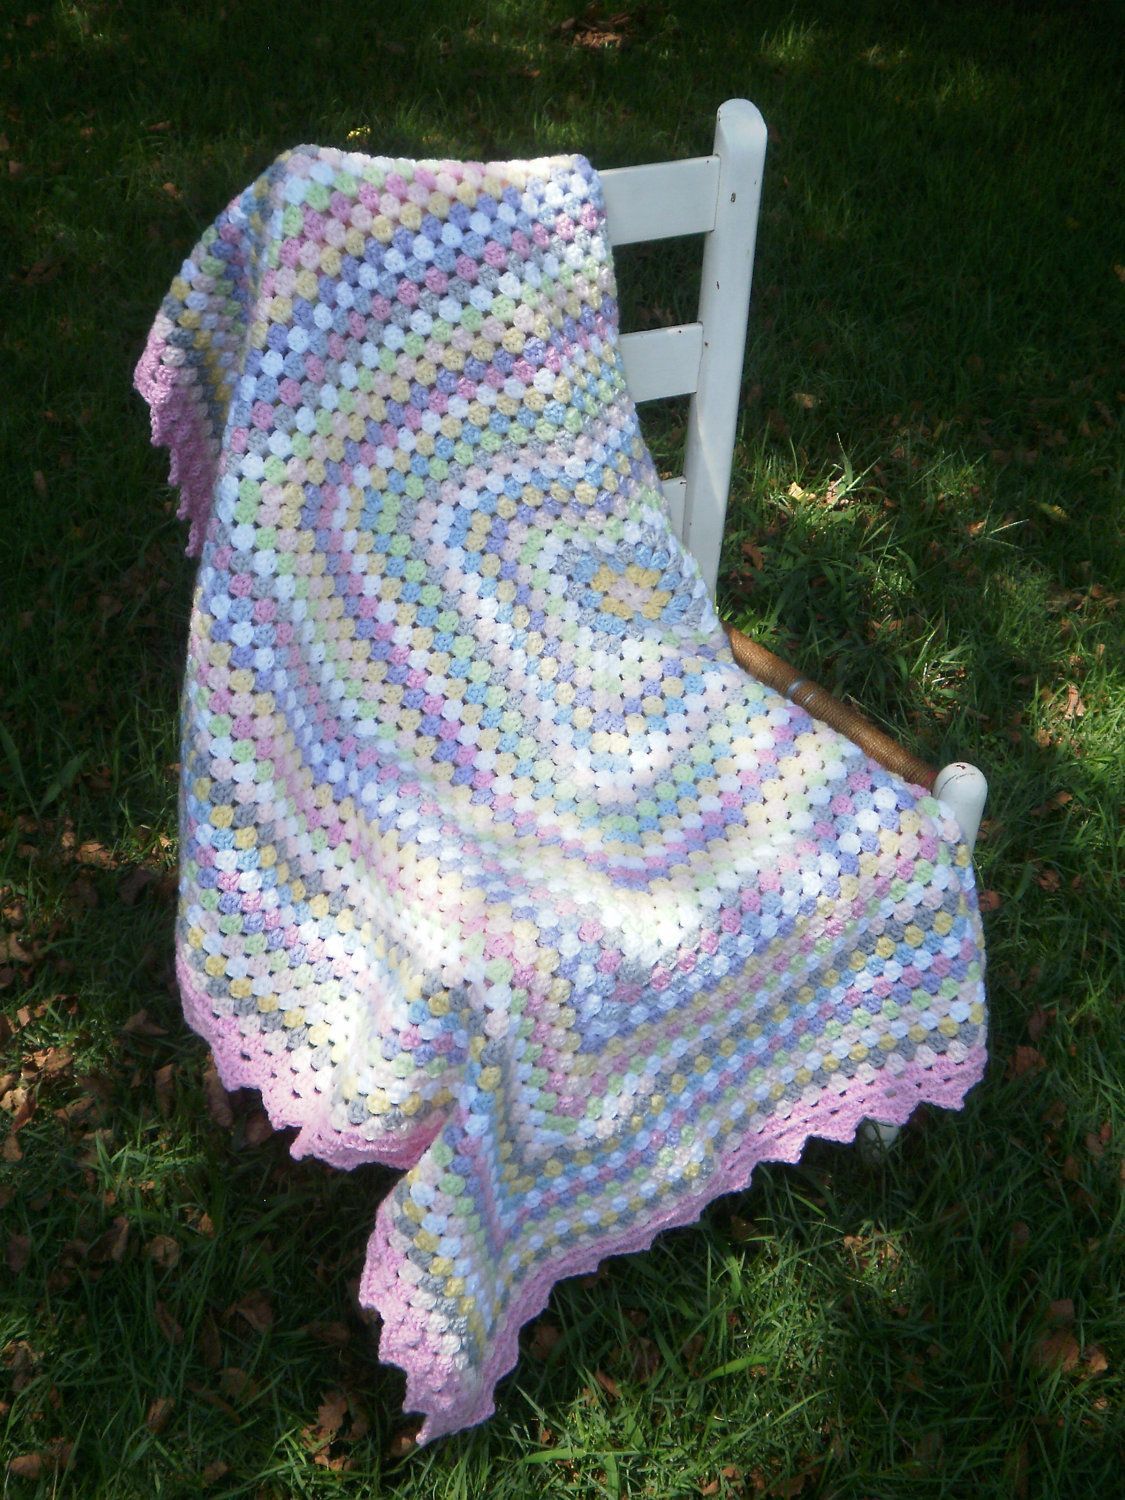 Twylas Beautiful Pastel Granny Square Crochet Afghan. (available in her etsy sho